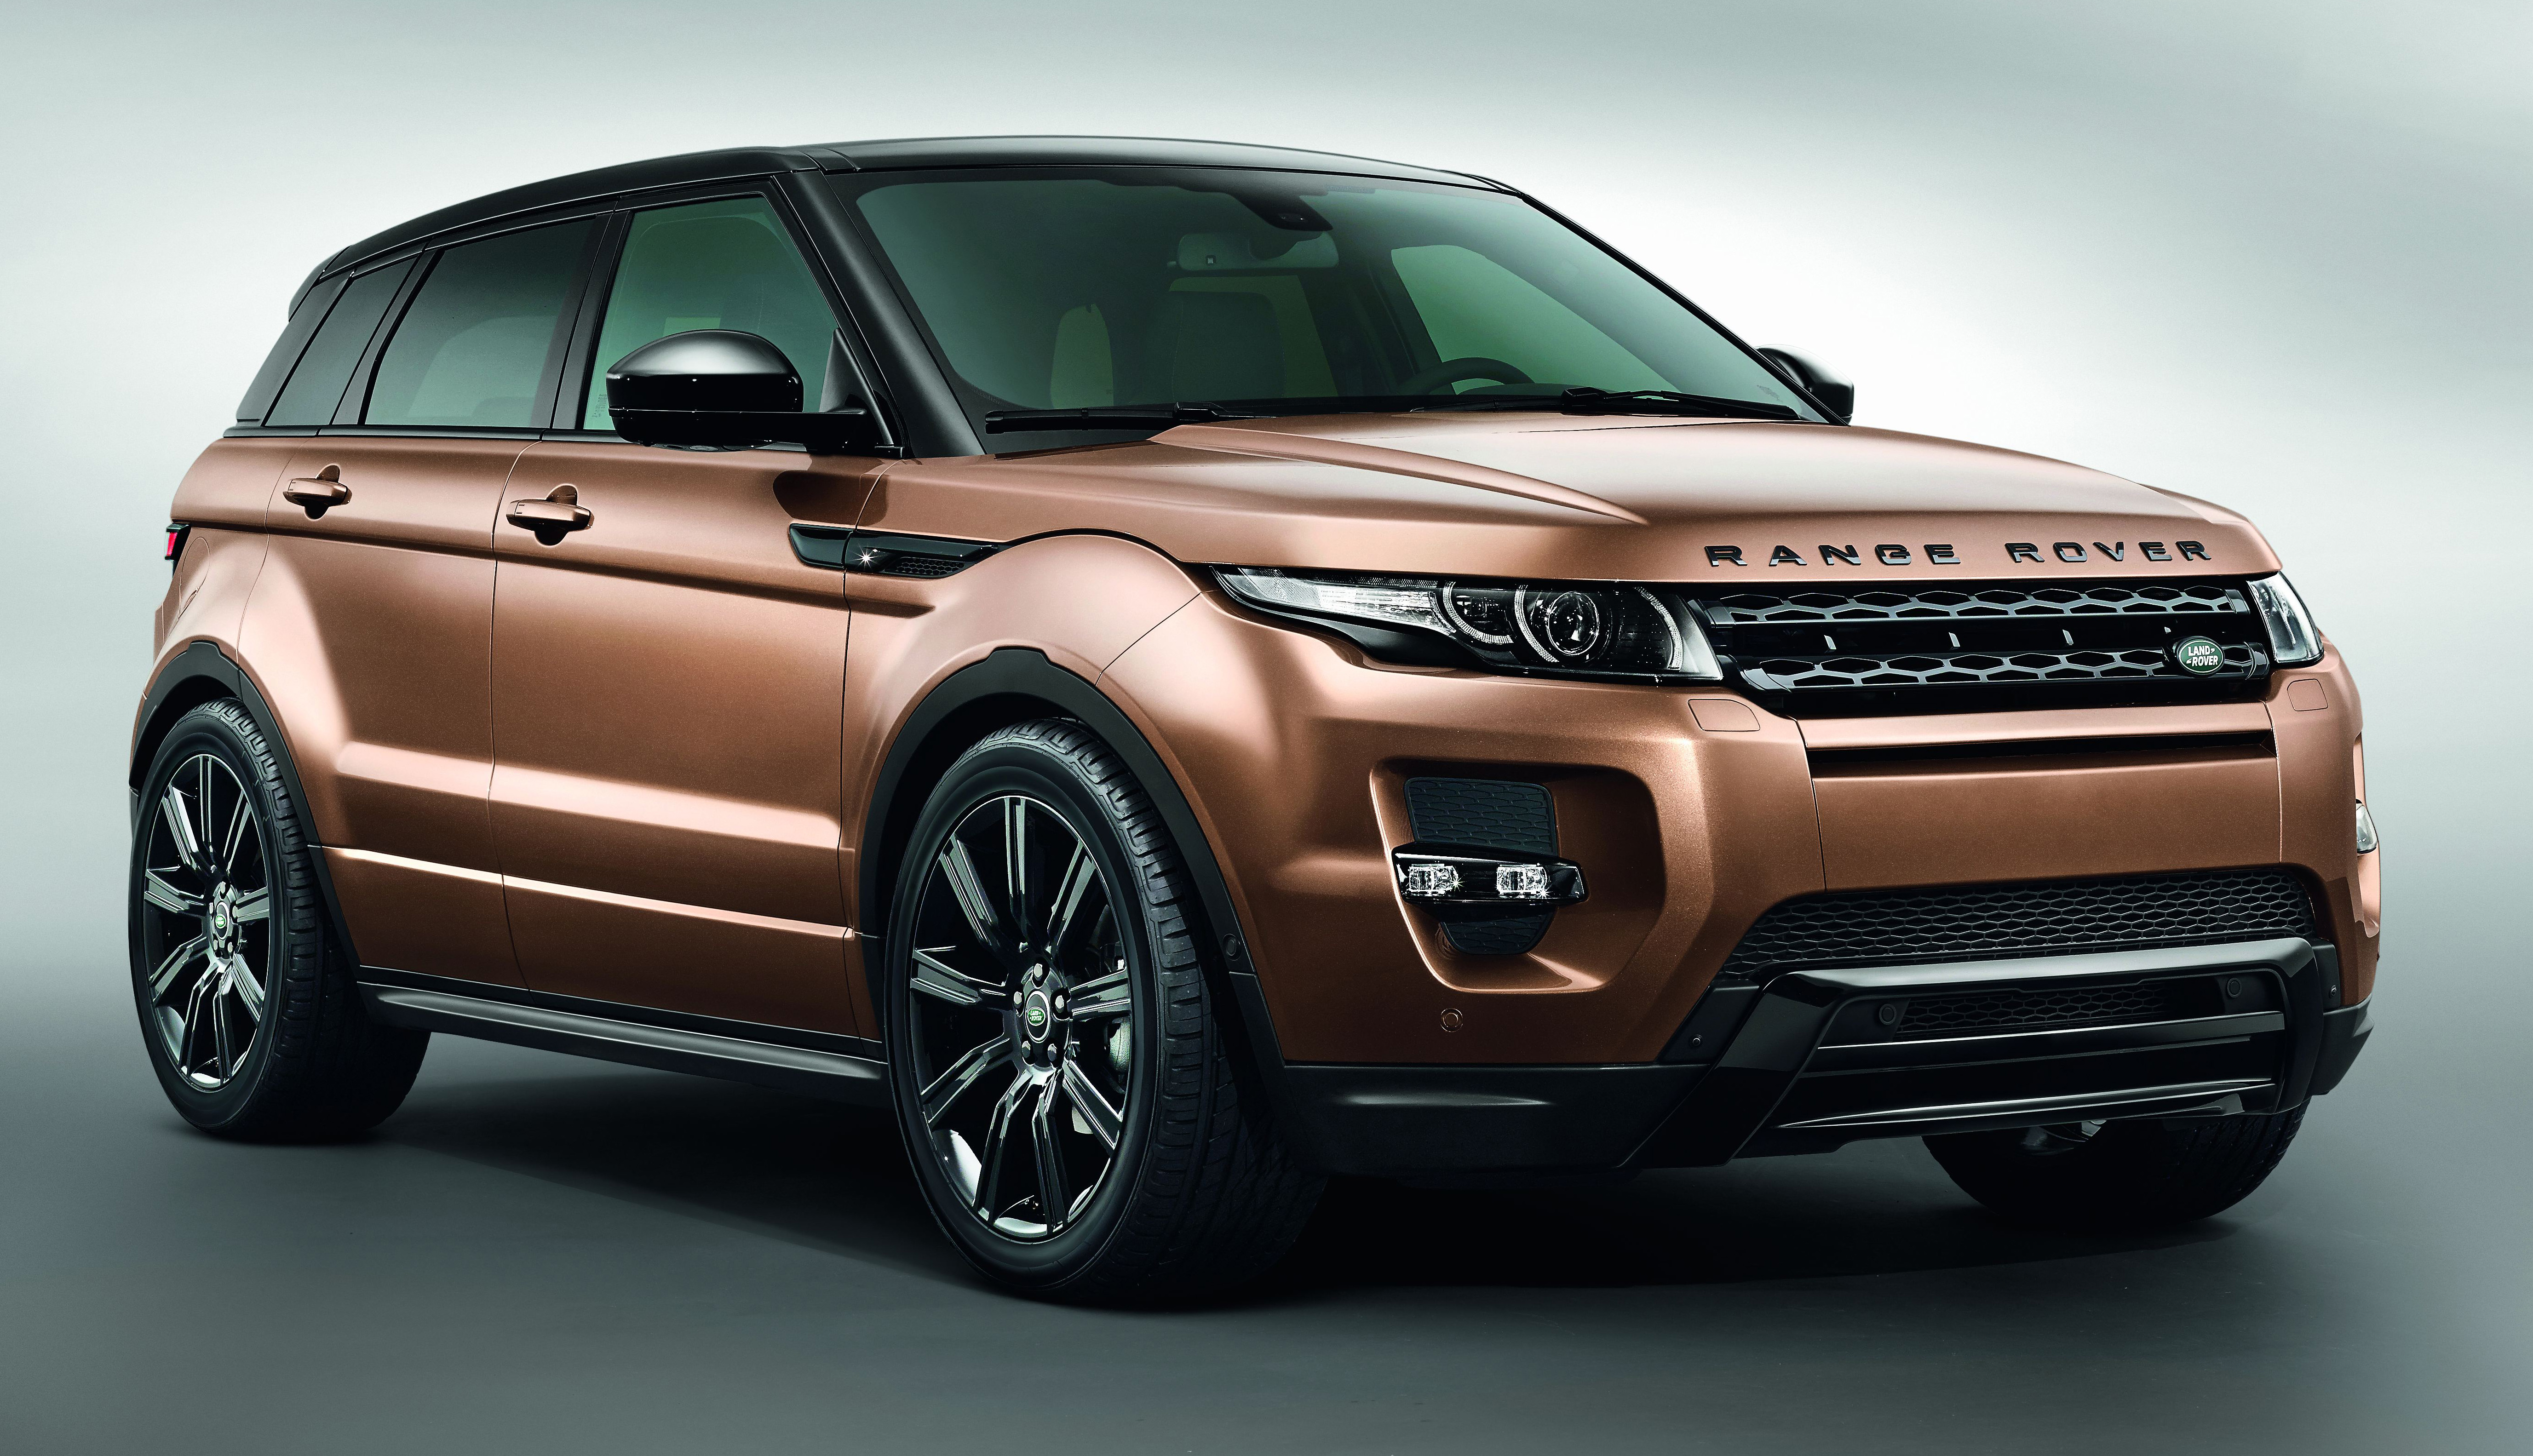 Land Rover Range Rover Evoque hd specifications